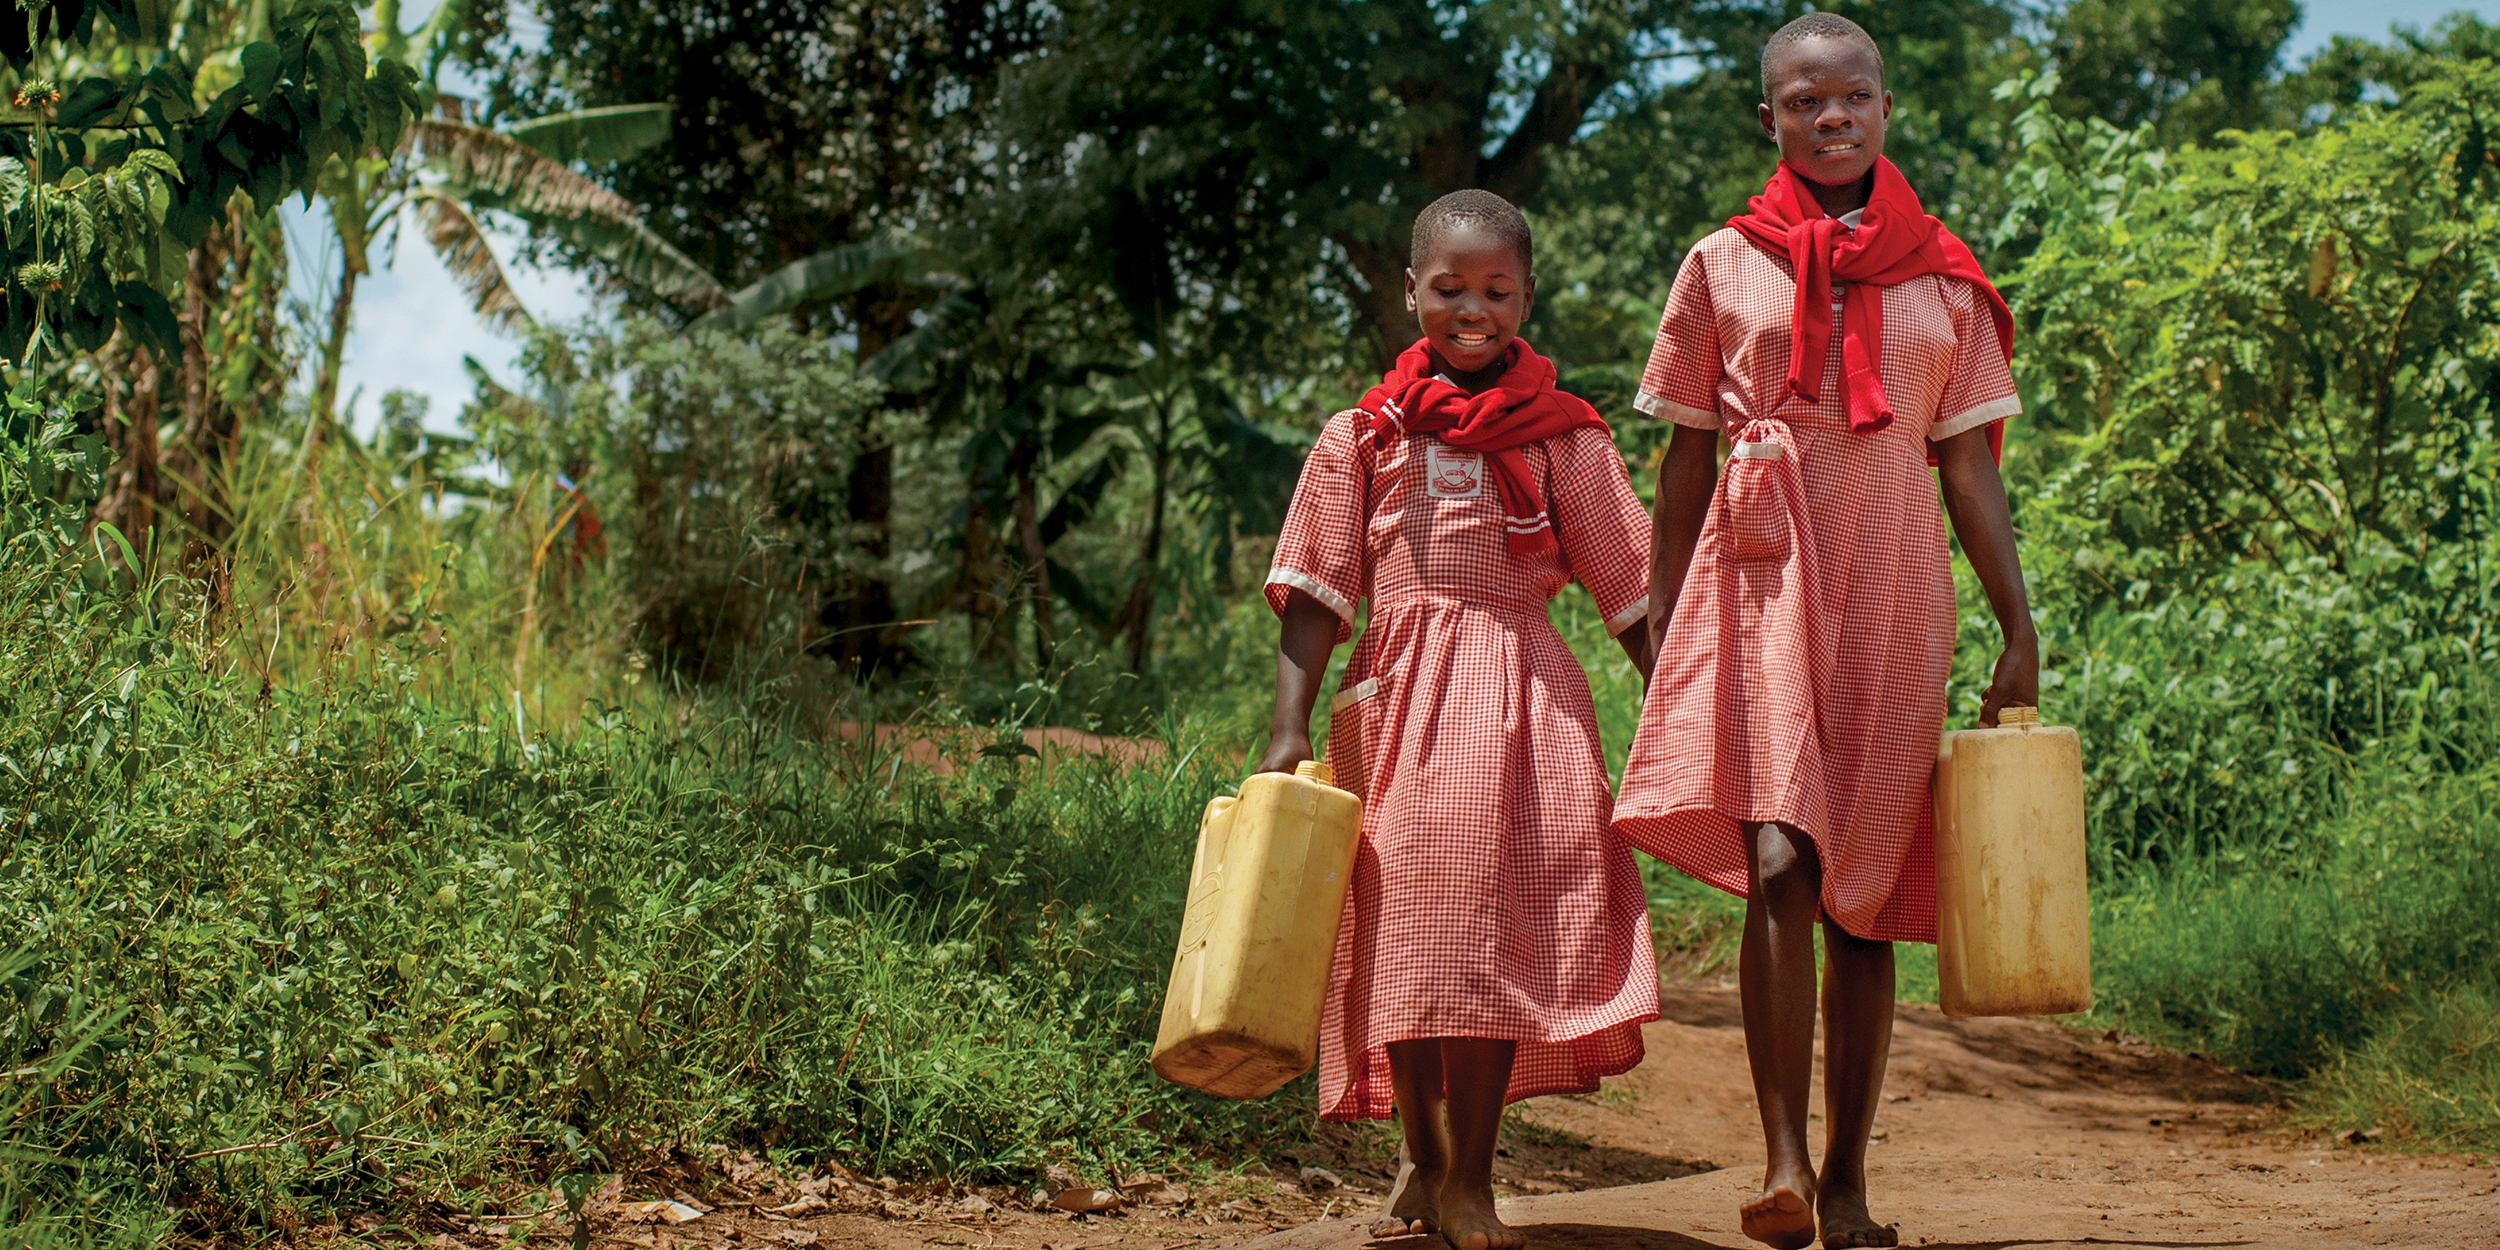 Because of the work of Save the Children, girls like Robina and Charity, ages 9 and 12, can safely fetch the family water – so they can get back to learning in Uganda. Photo credit: Save the Children/Rick D’Elia 2017.